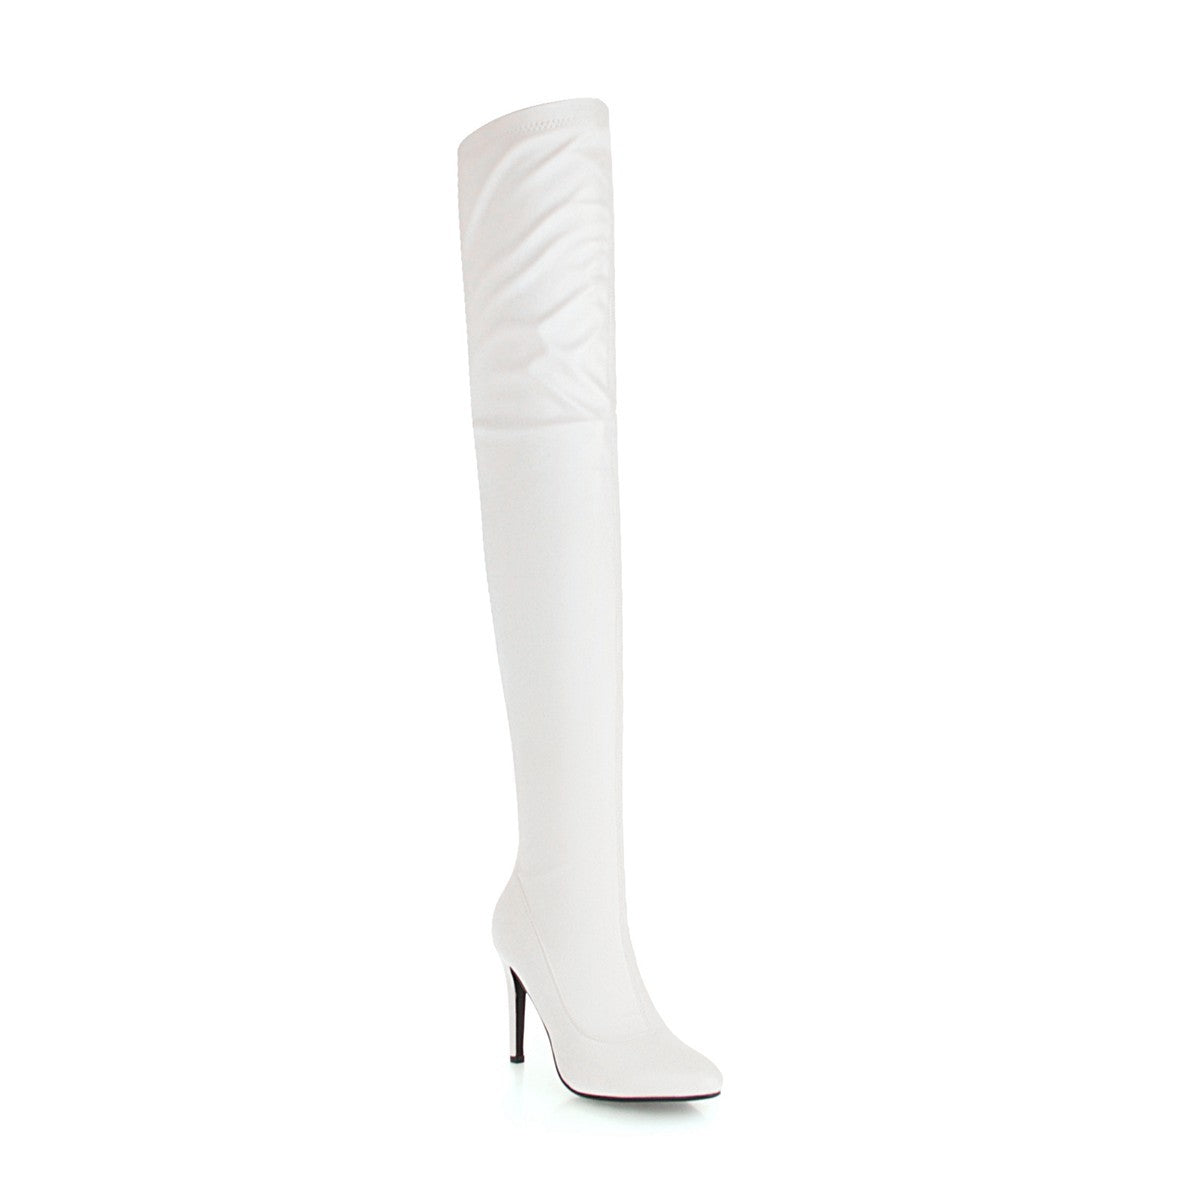 Soft Leather Over the Knee Boots Winter Stiletto Heel Shoes for Woman 5869